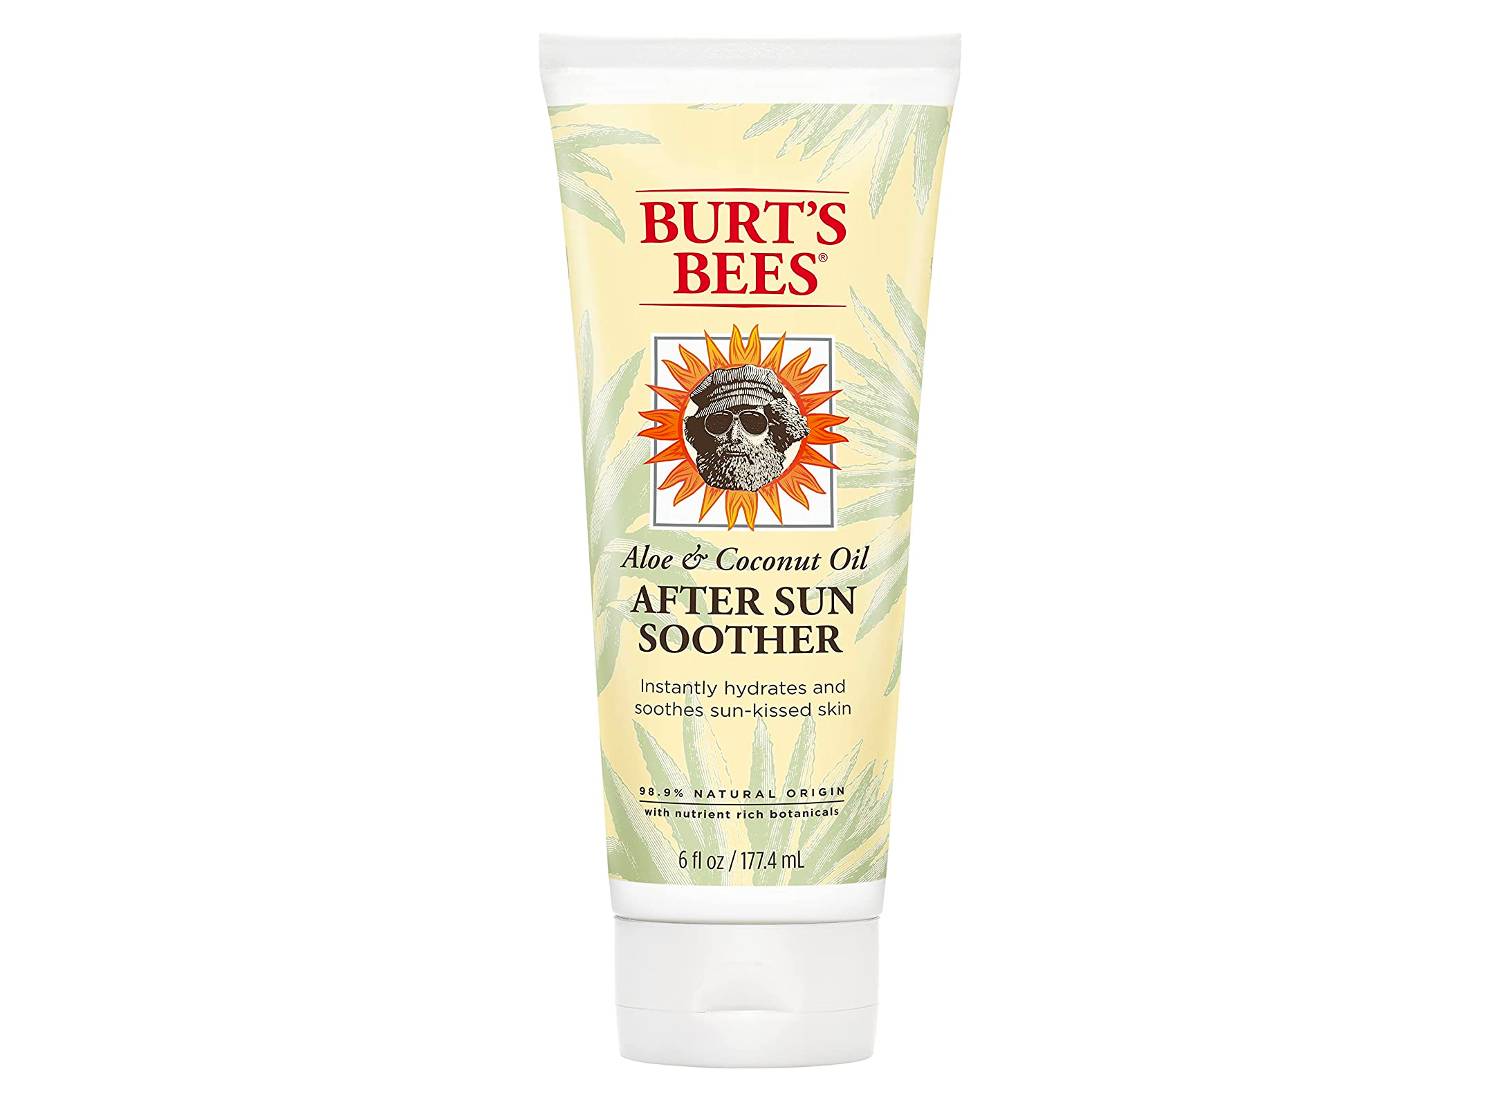 A 6 oz tube of Burt's Bees After Sun Soother with aloe vera and coconut oil